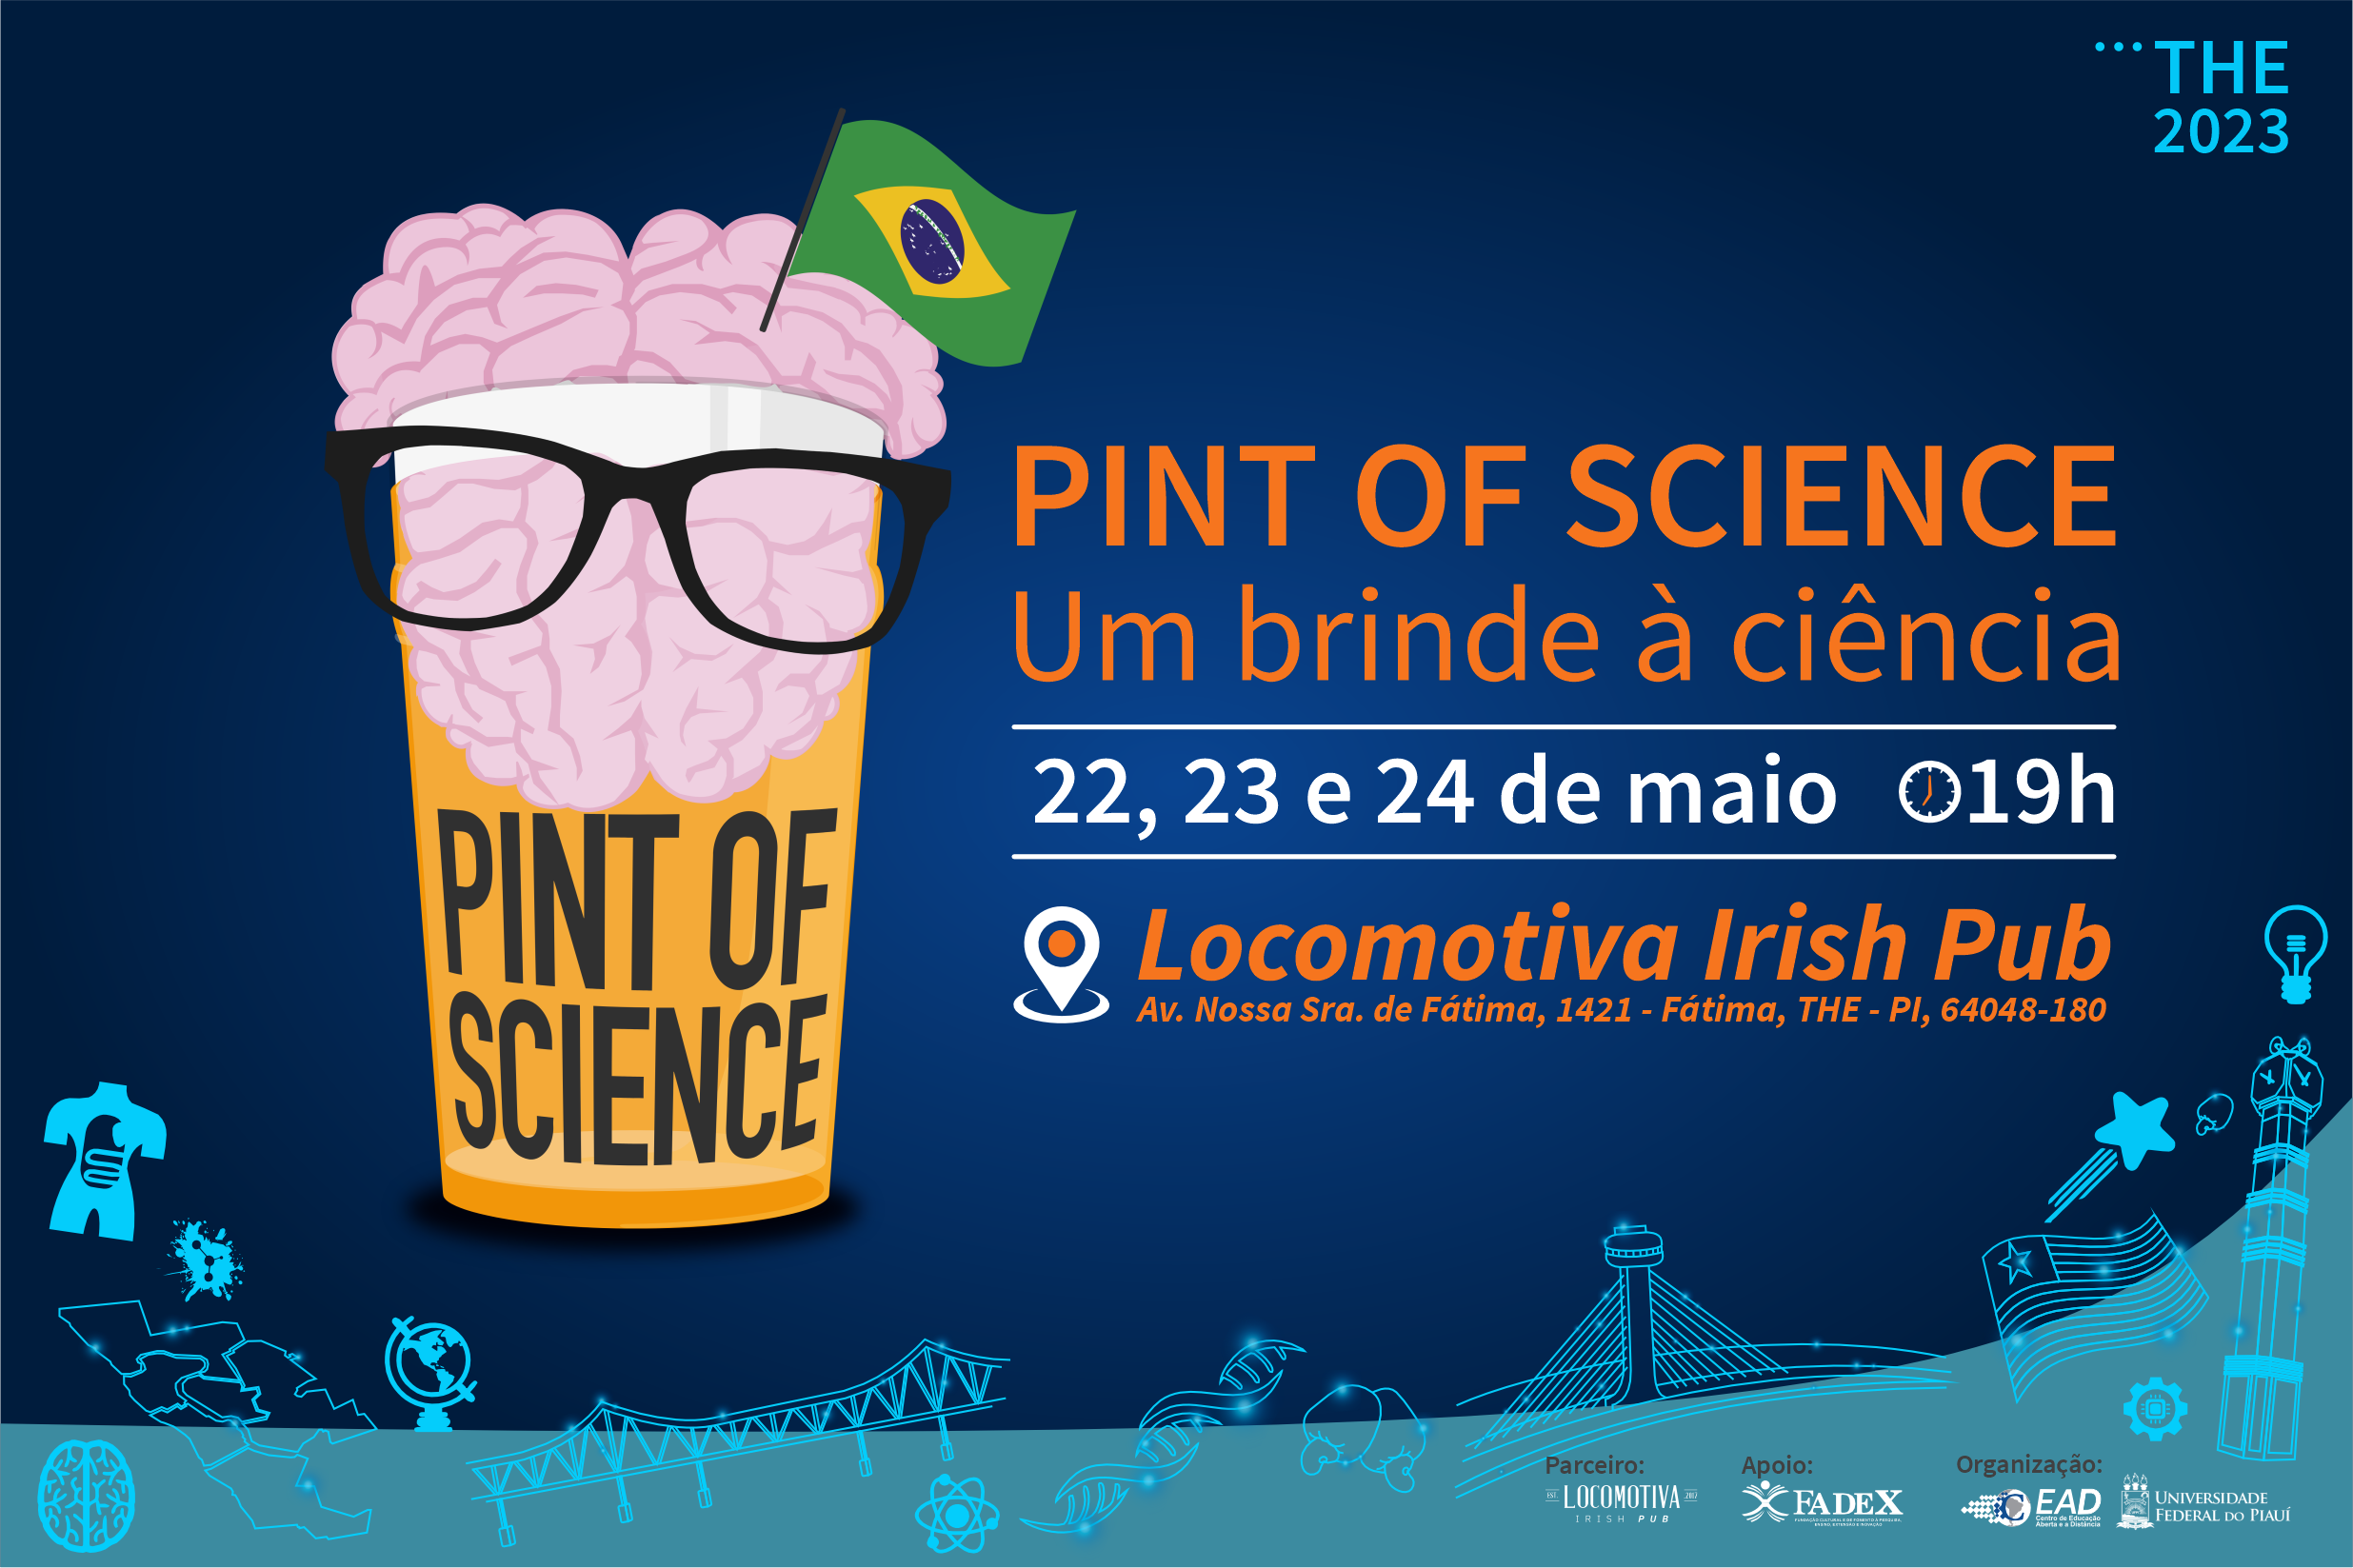 PINT OF SCIENCE 2023 BANNER SITE